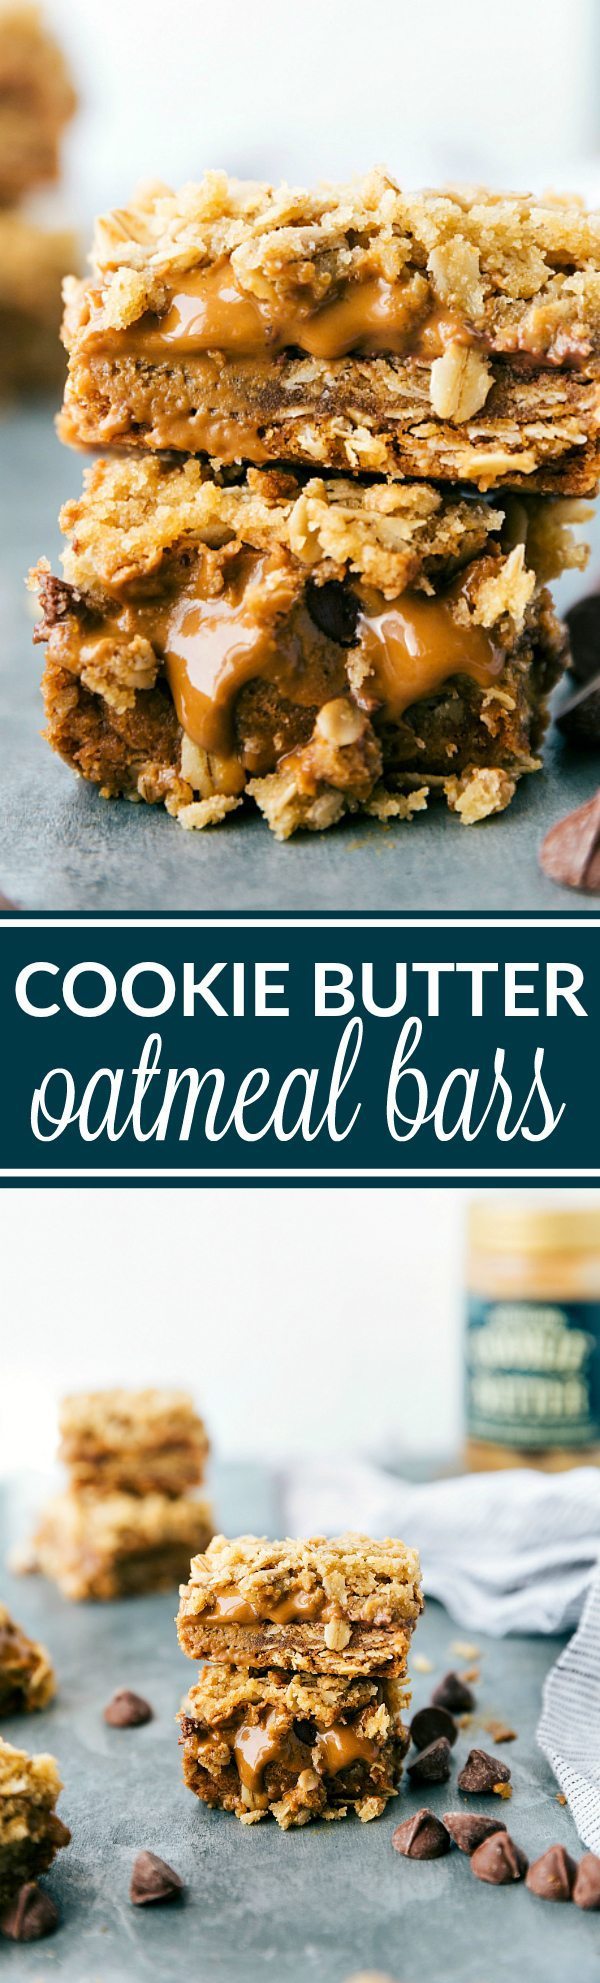 Simple-to-make oatmeal bars with a gooey cookie butter (biscoff) and milk chocolate chip center. These cookie butter oatmeal bars are sure to be a huge hit! These bars are like the famous Carmelitas, but with COOKIE BUTTER instead! via chelseasmessyapron.com